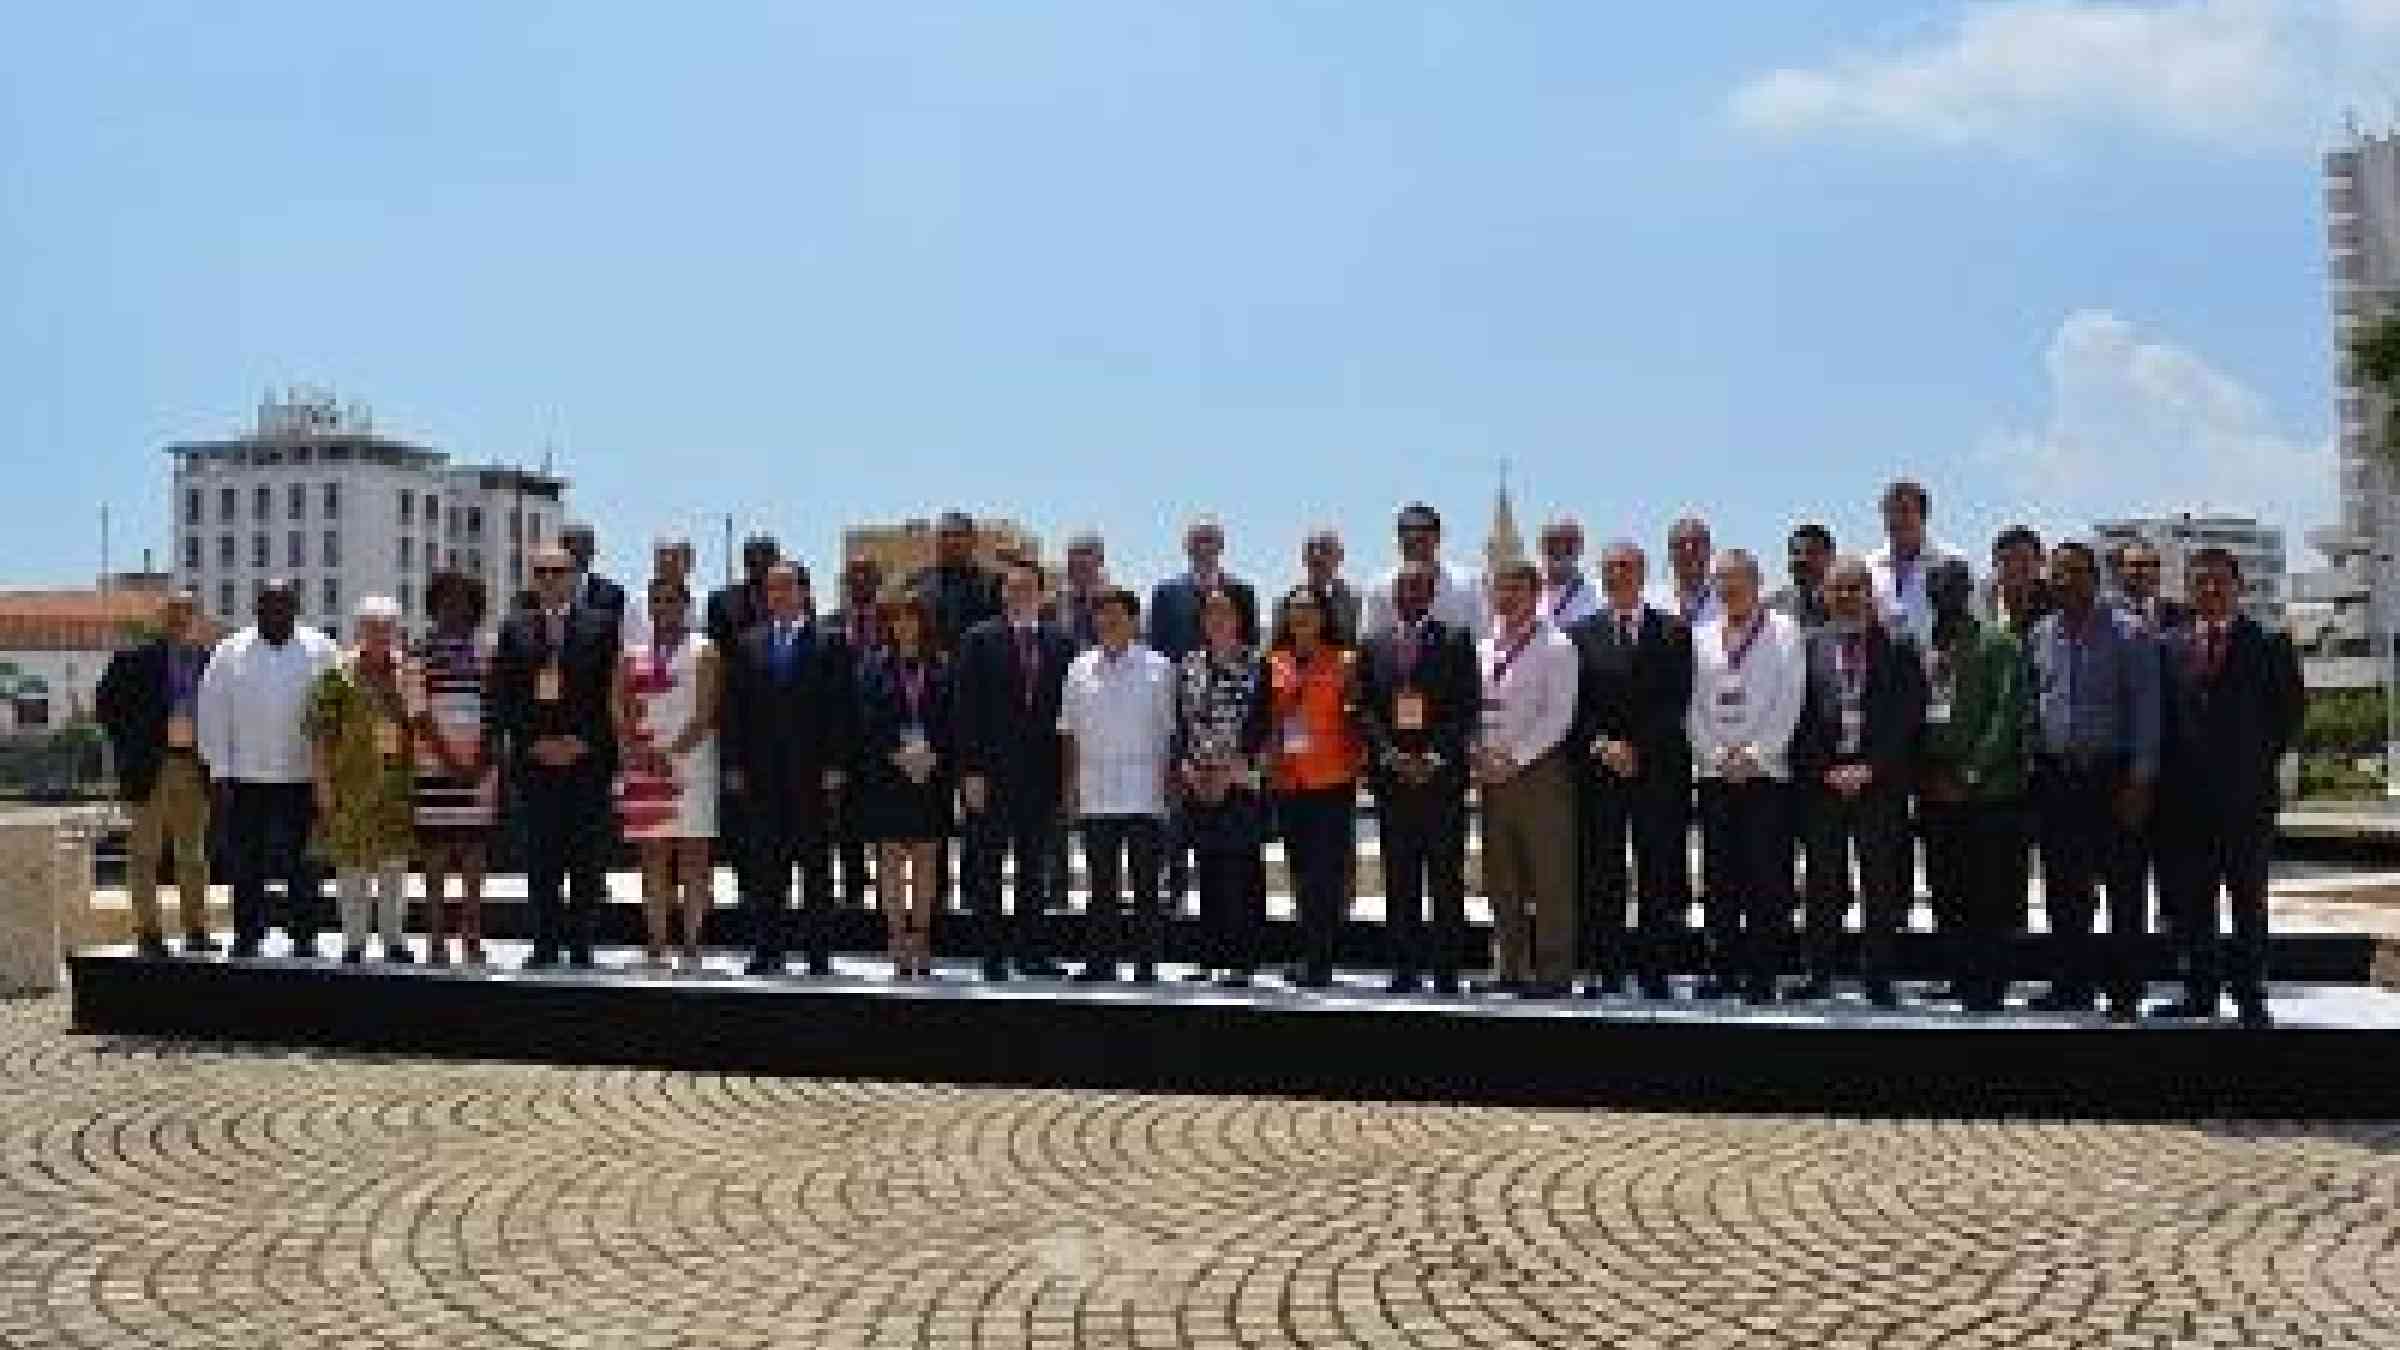 The Americas and Caribbean meeting on DRR closed with a high-level ministerial segment